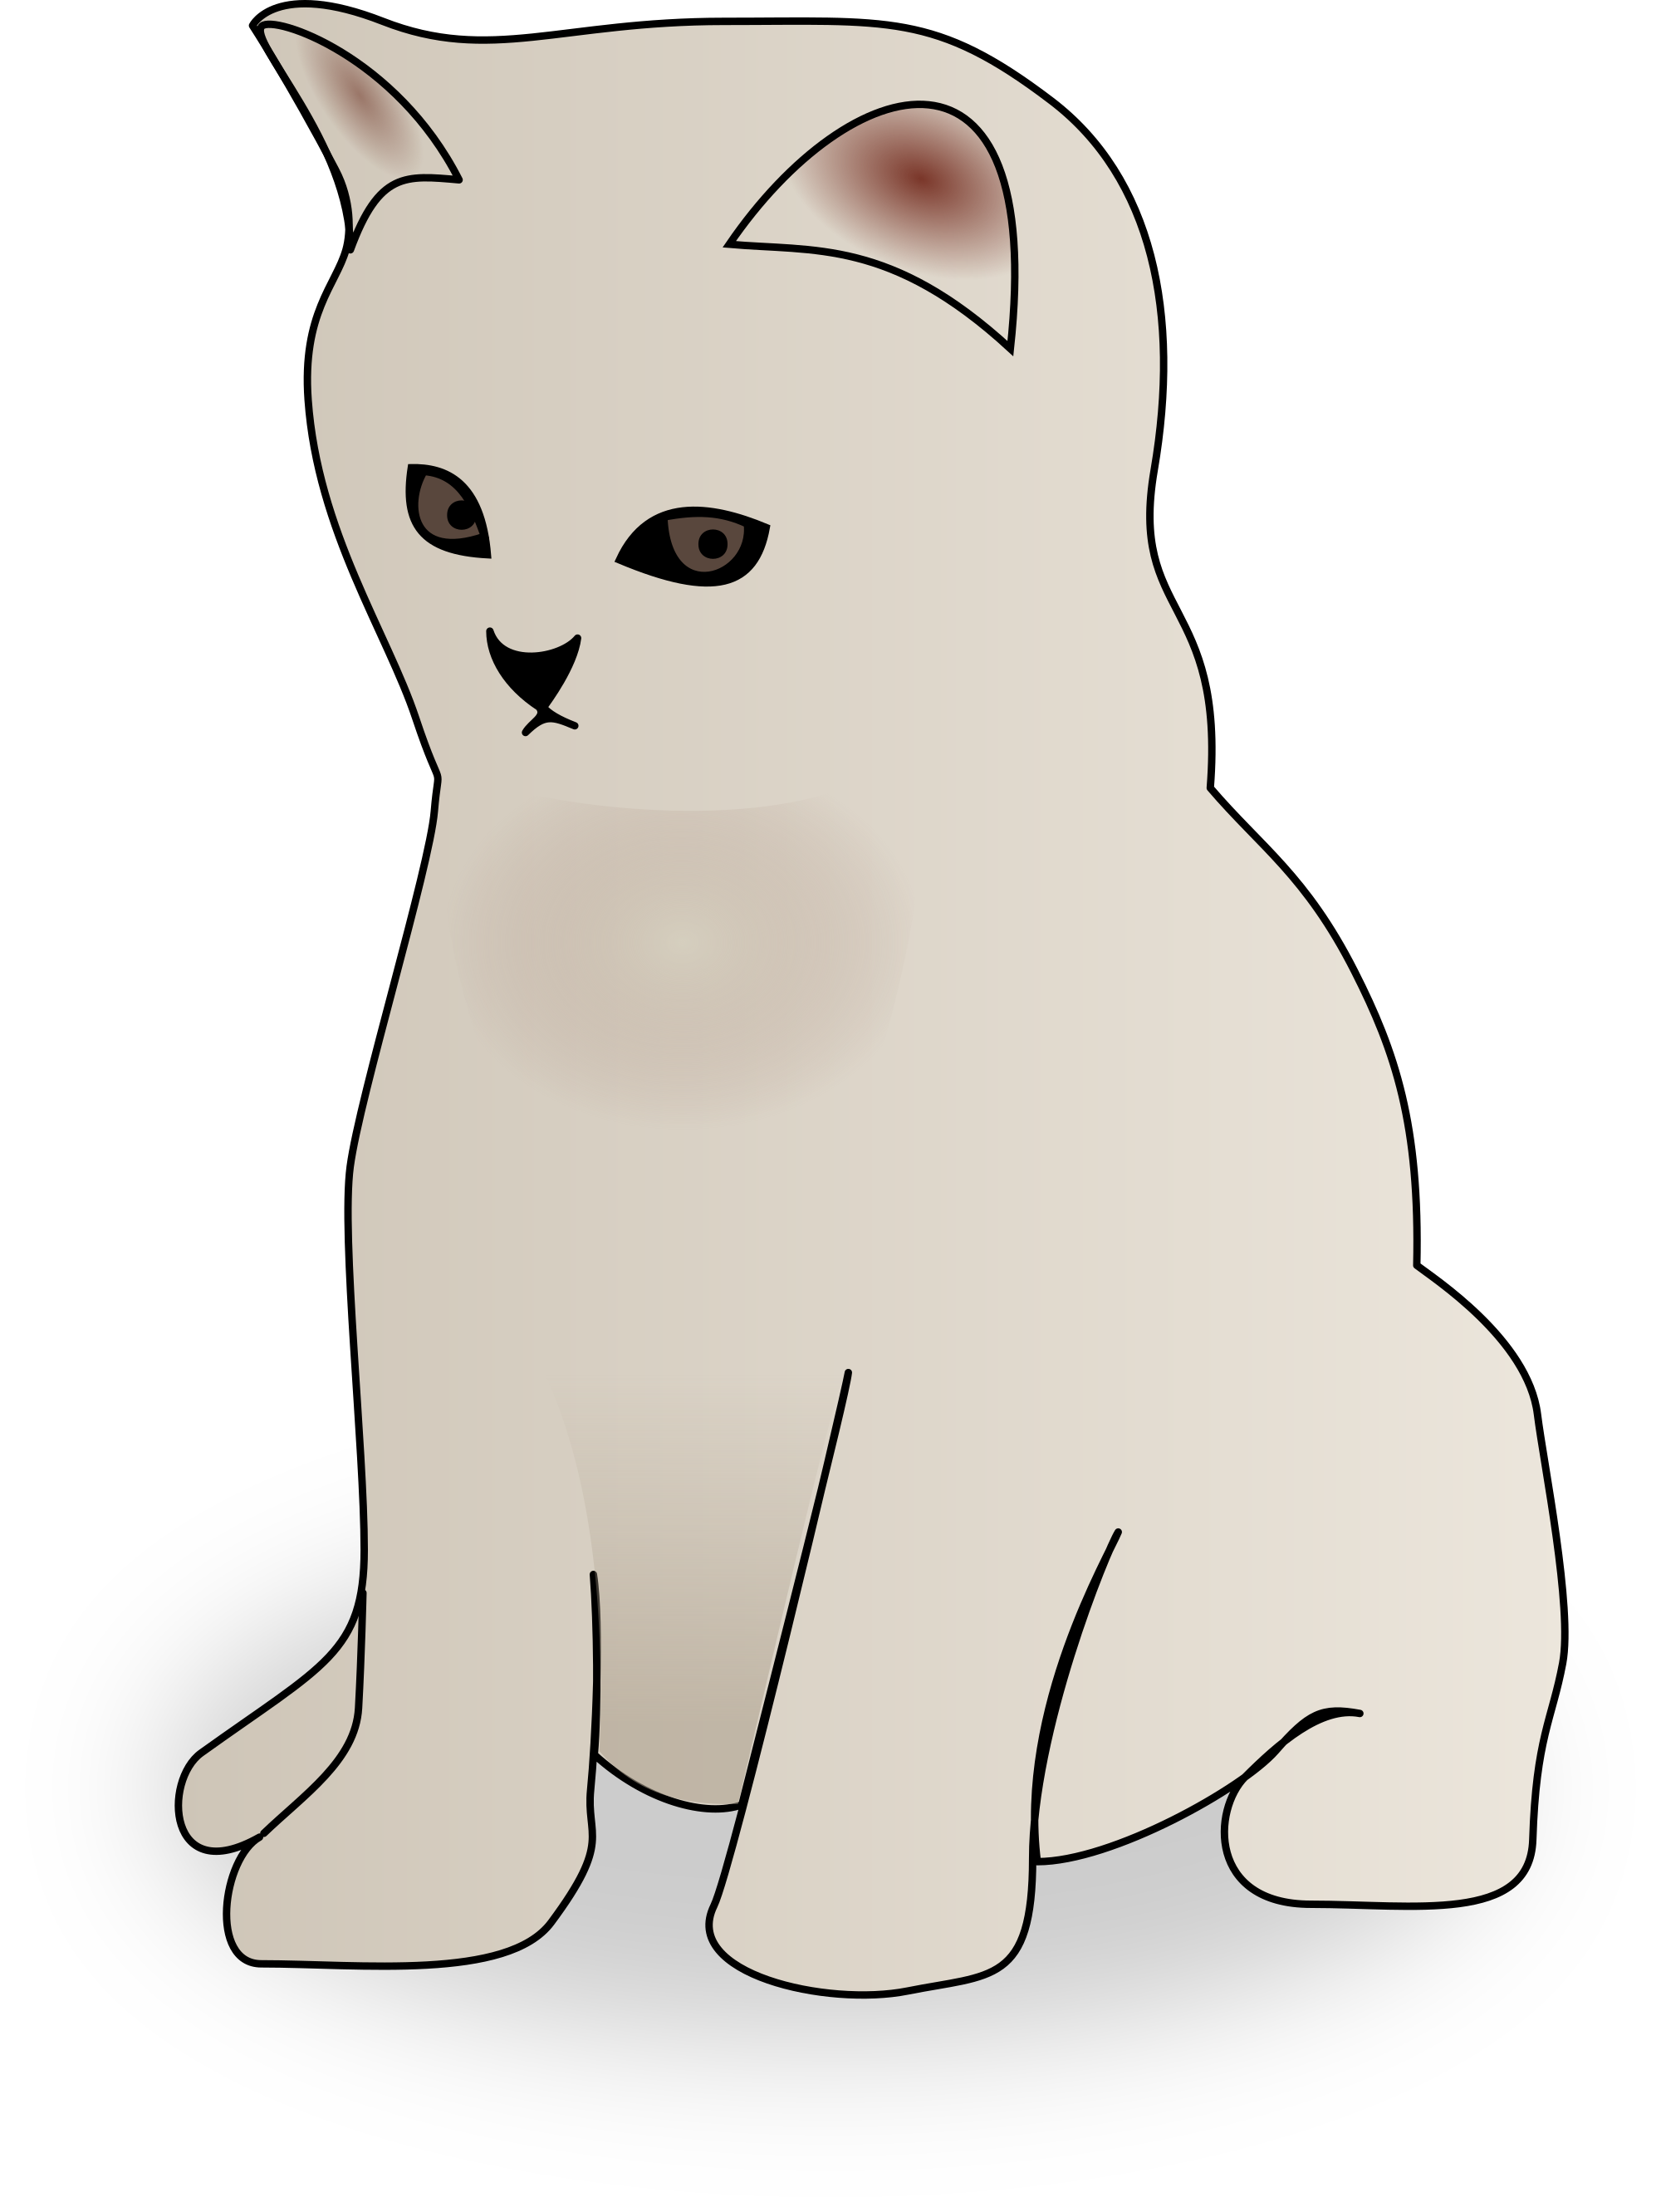 Free Kitten Thinking And Vector Image Clipart